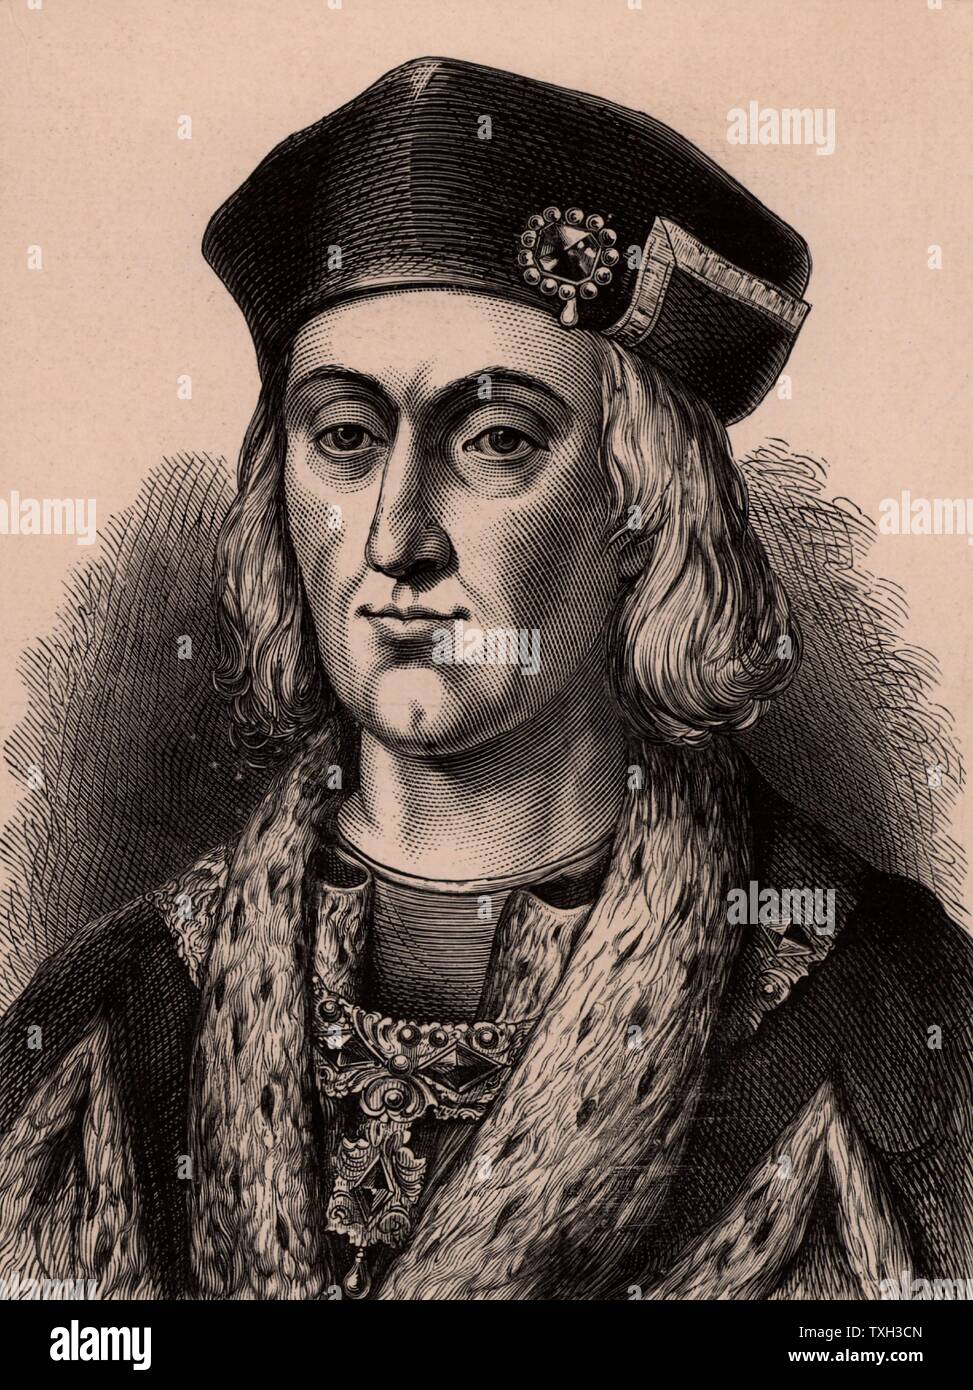 Henry VII (1457-1509) first Tudor king of England from 1485.  Defeated Richard III at Bosworth Field on 22 August 1485, the battle which ended the Wars of the Roses. Wood engraving c1900. Stock Photo